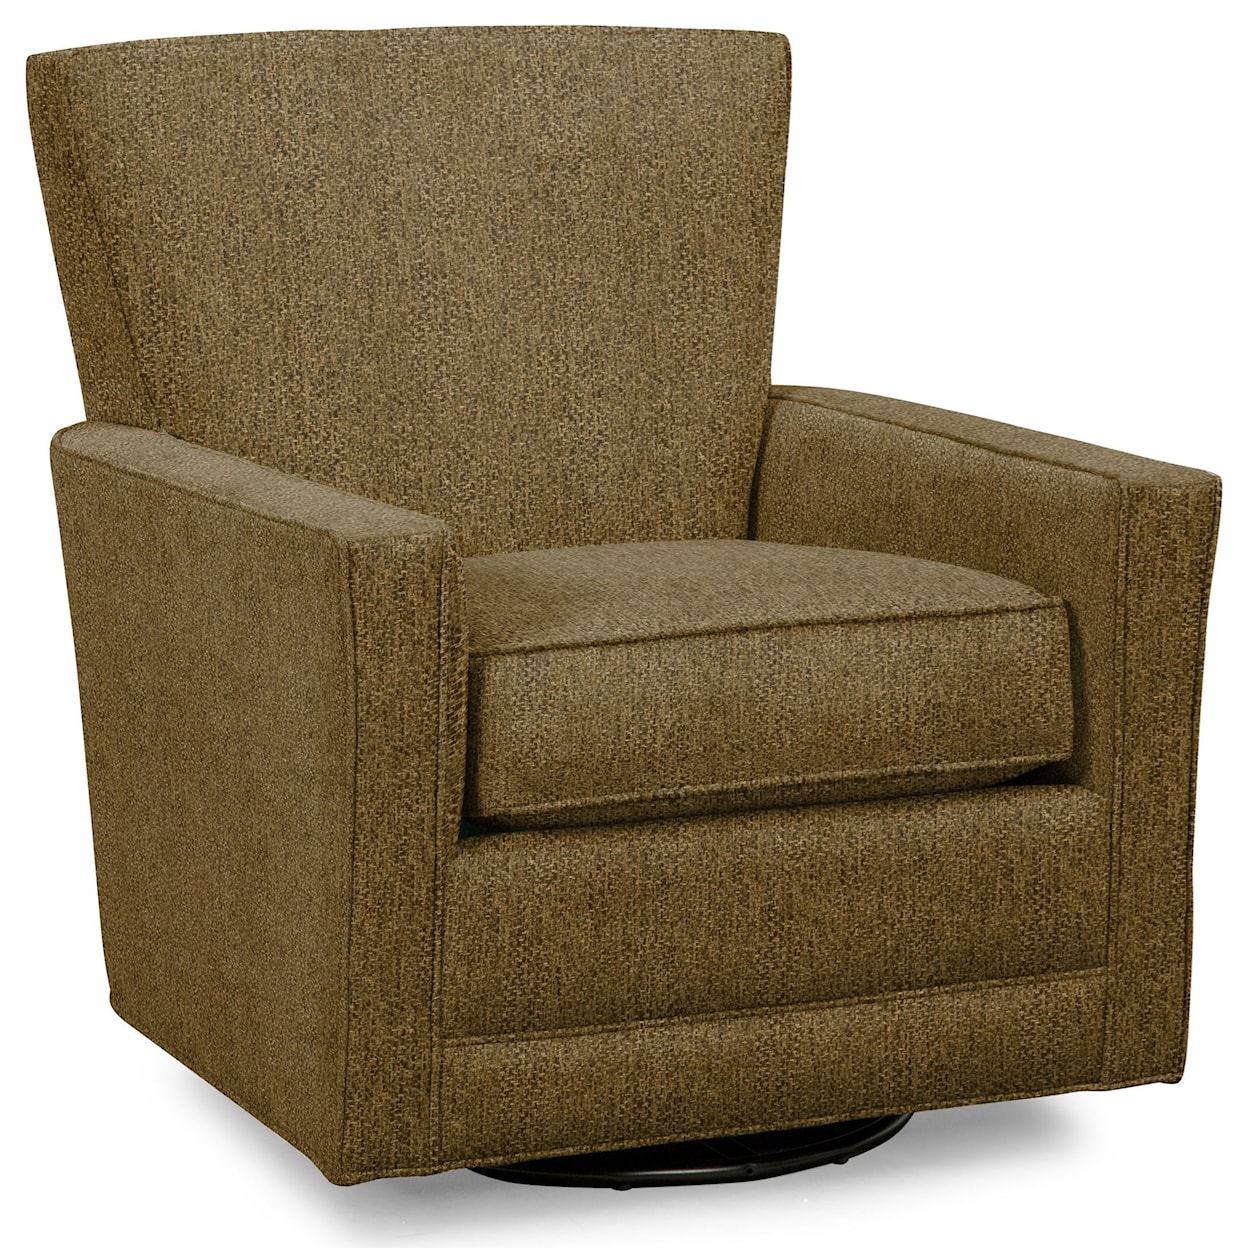 Hickory Craft Swivel Chairs Swivel Chair